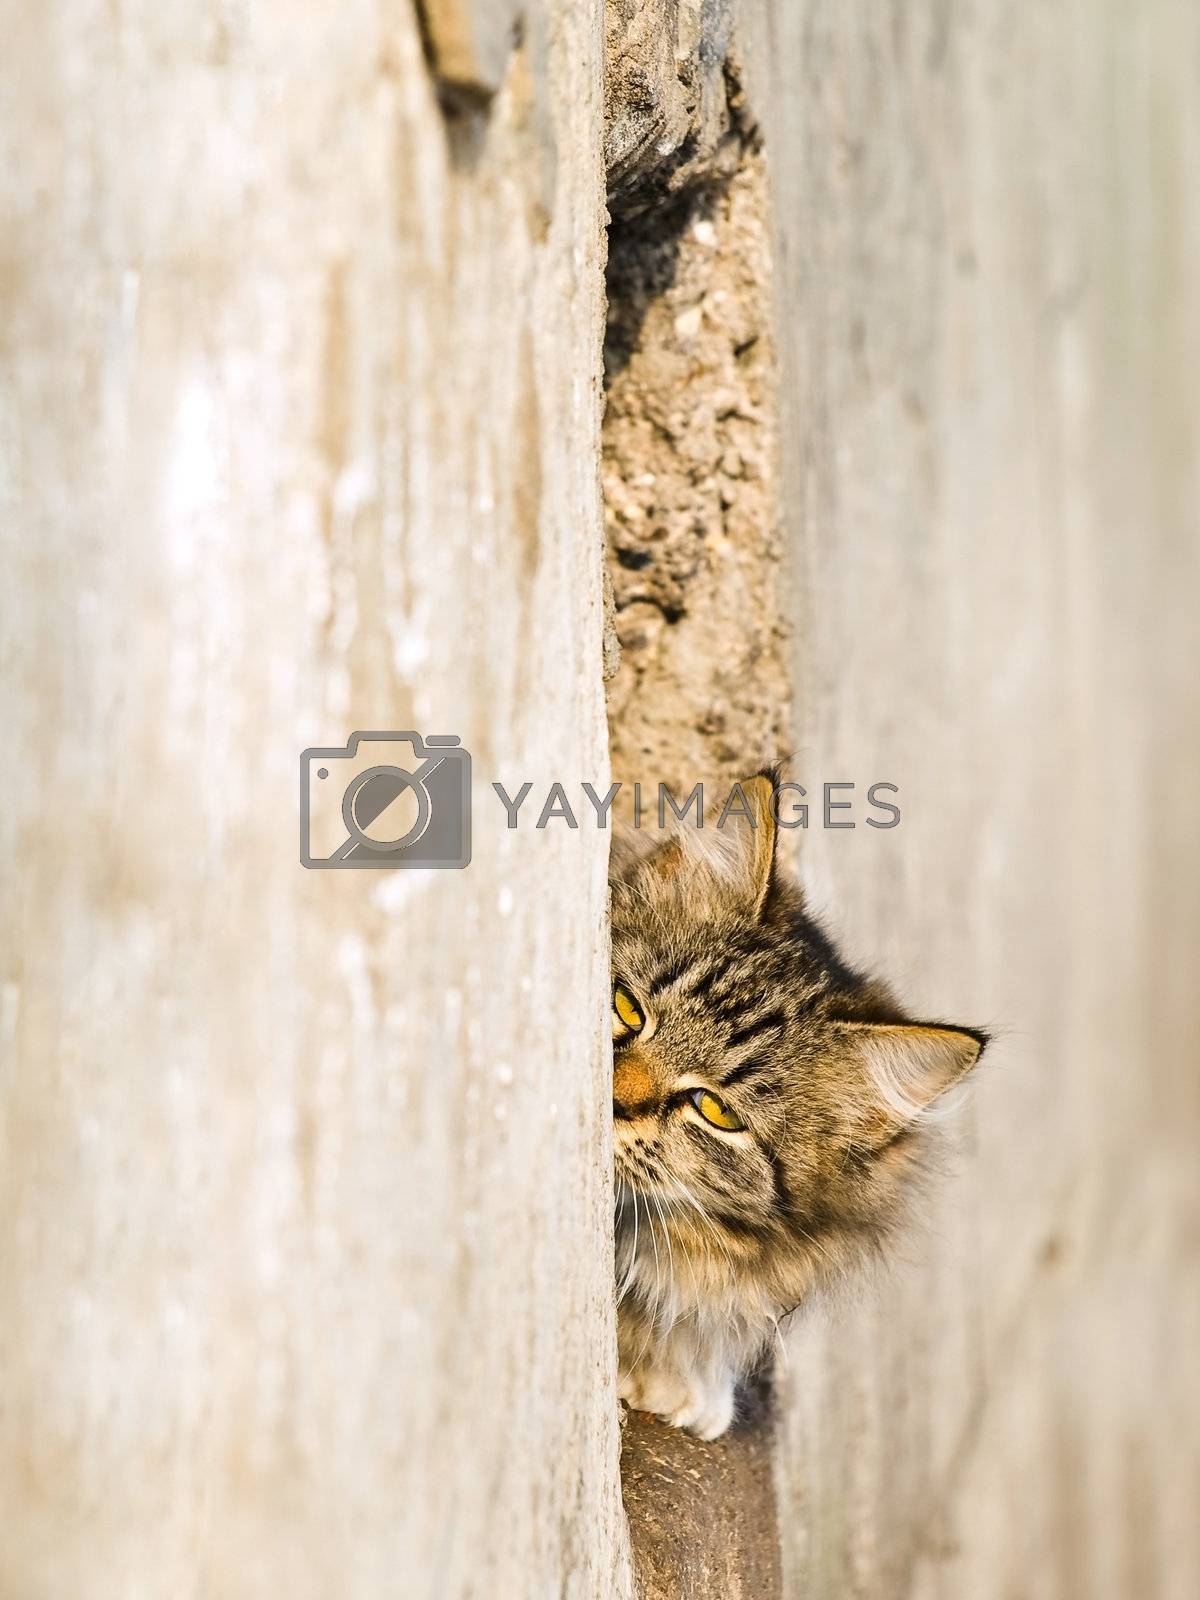 Royalty free image of cat by SNR